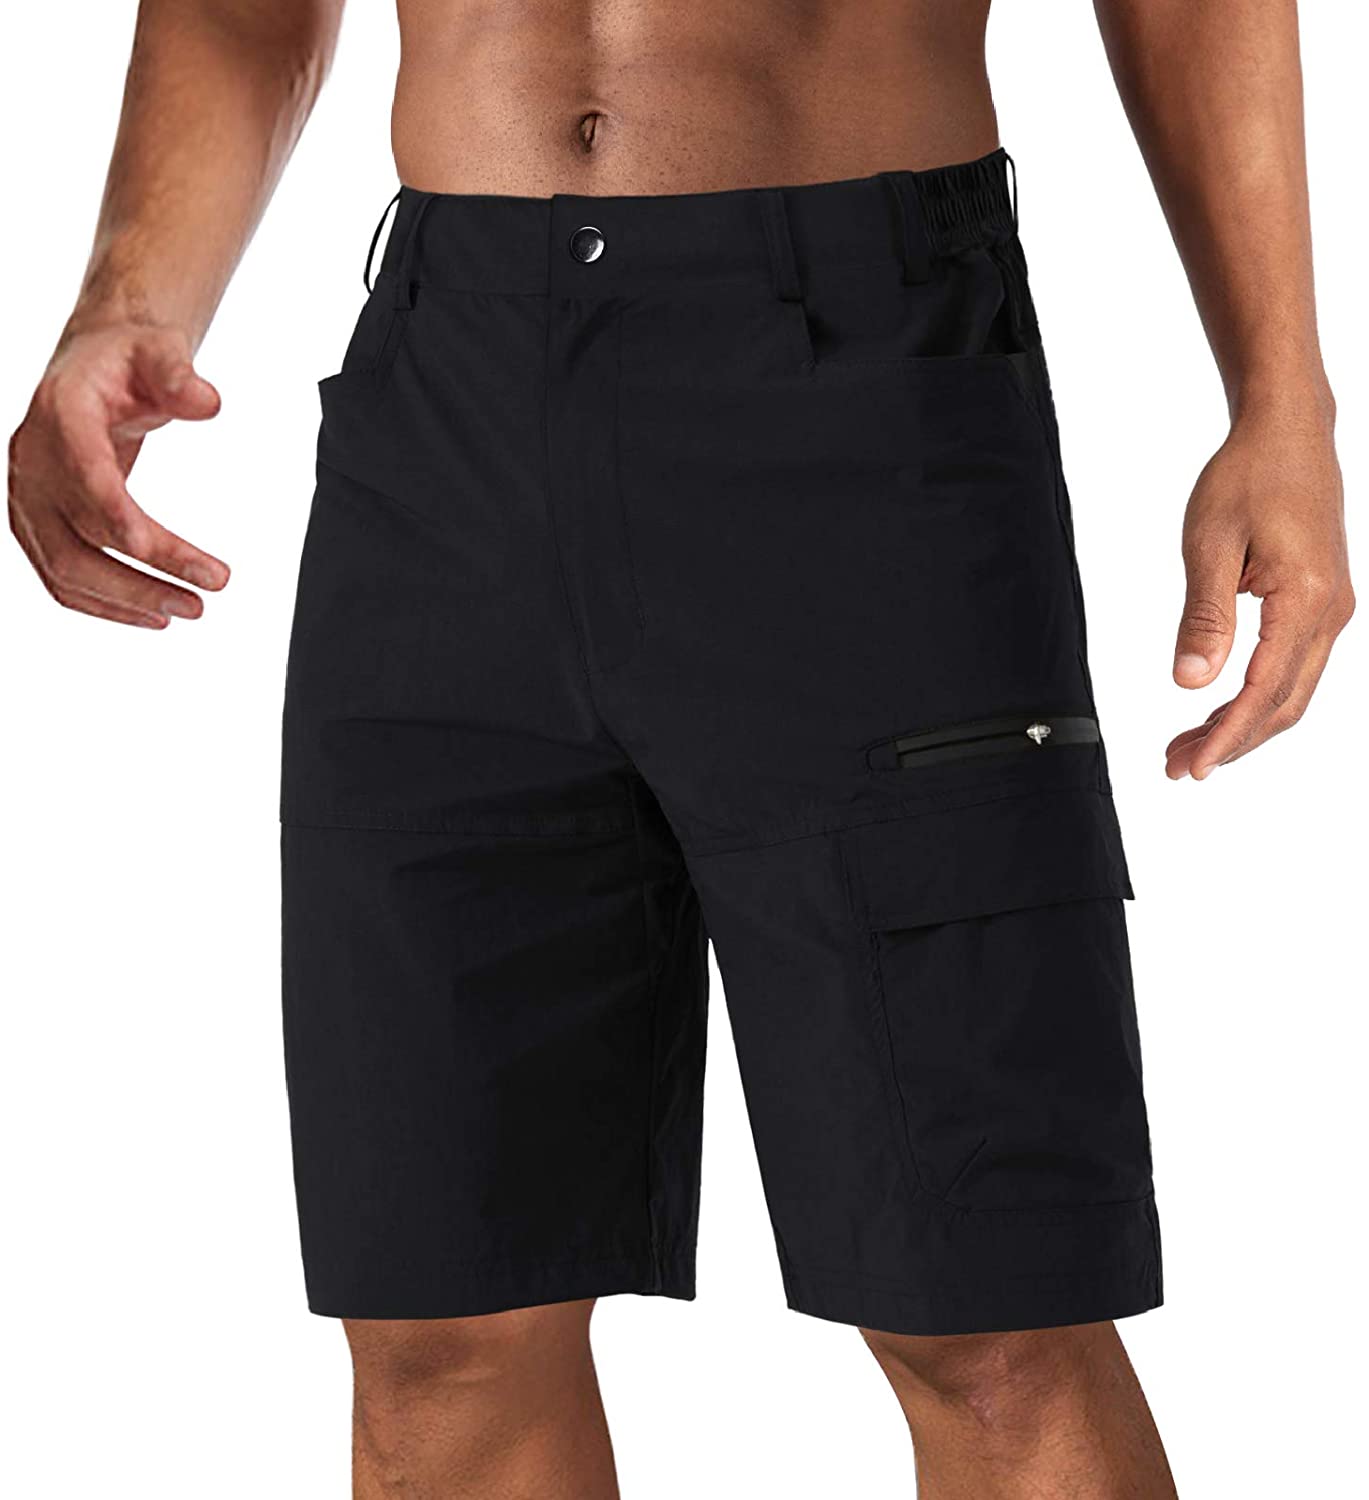 CRYSULLY Men's Cargo Quick Dry Shorts Outdoor Summer Casual Loose Fit Shorts 